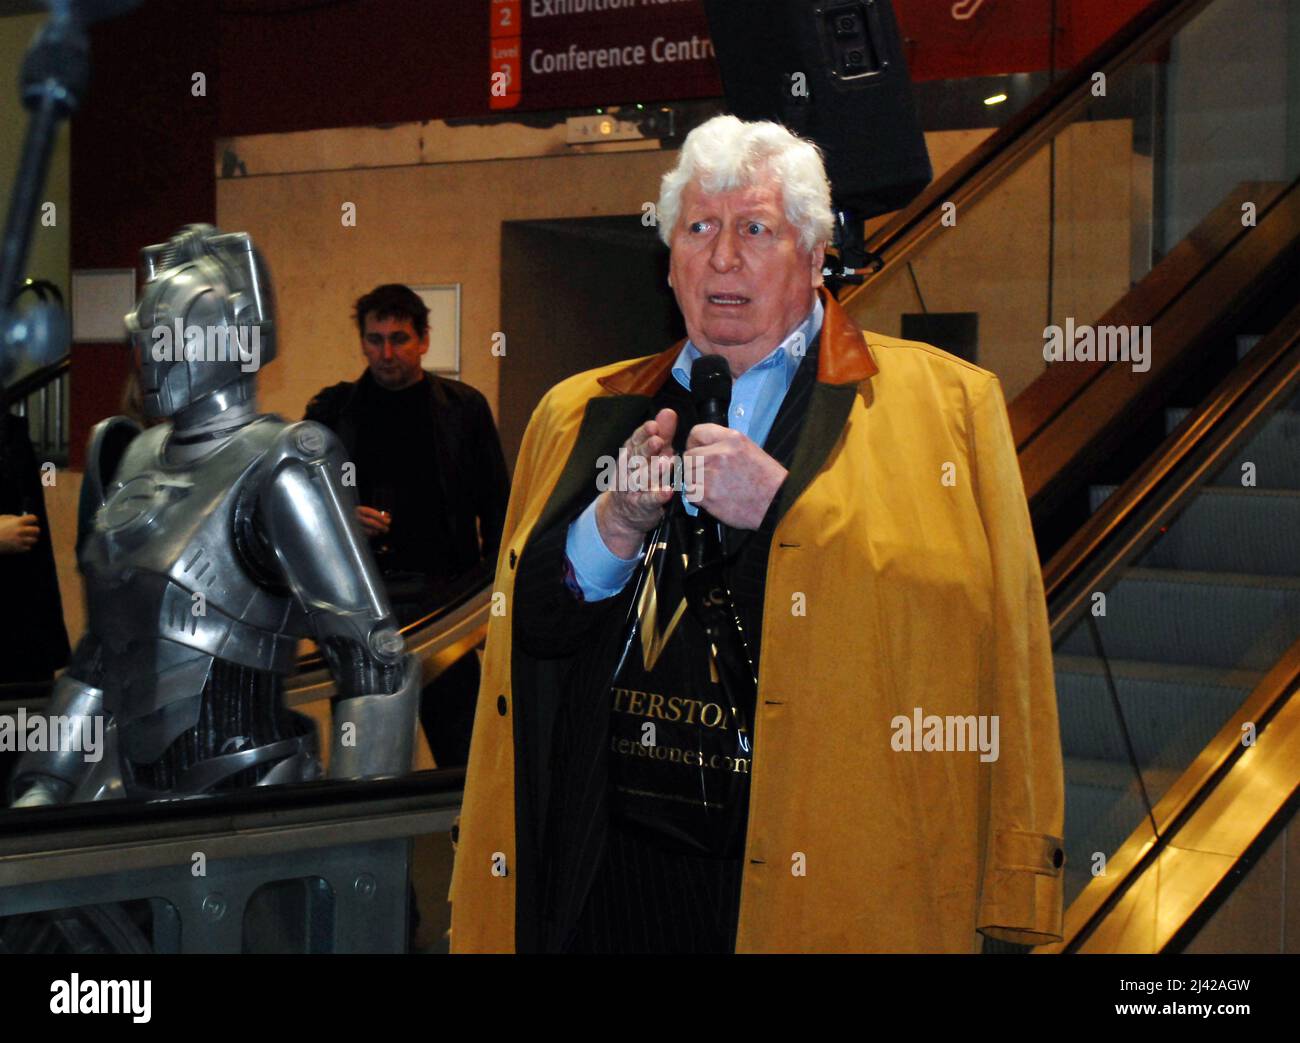 TV, film & stage actor, Tom Baker, best known as Doctor Who in the classic BBC science fiction series. Here opening the Doctor Who exhibition in 2008. Stock Photo